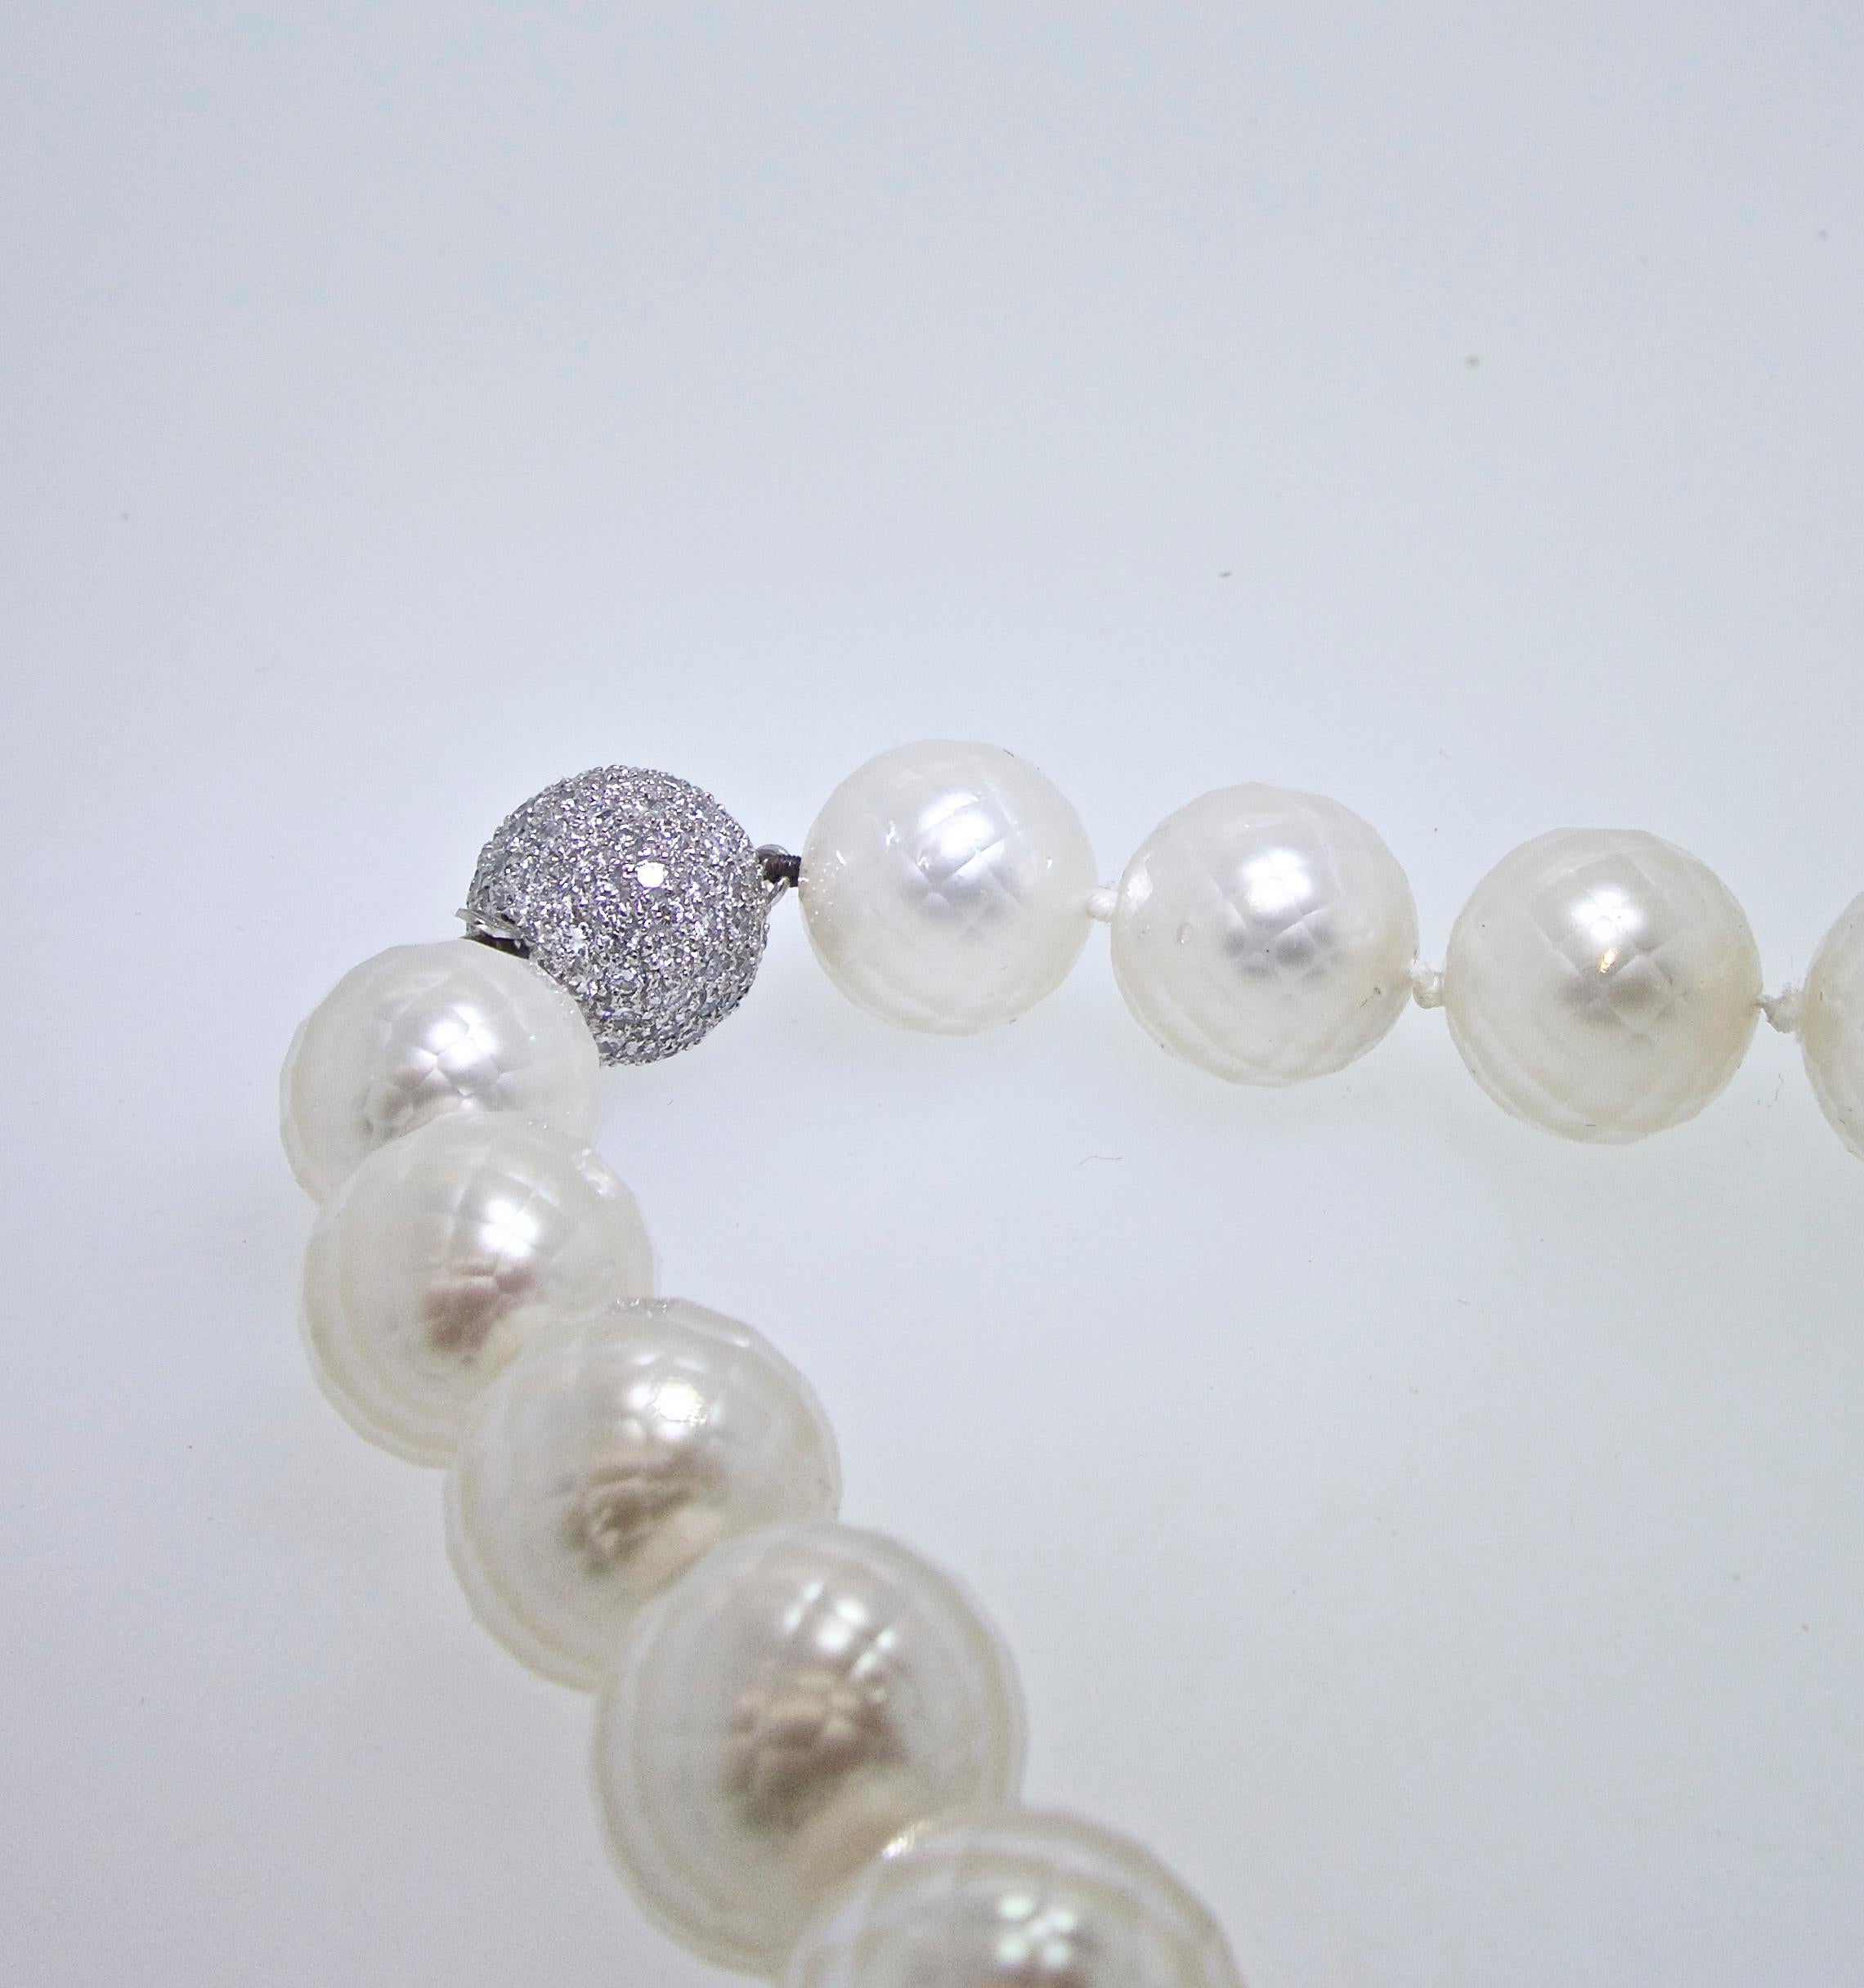 Modern Faceted South Sea Pearls, Unusual and Distinctive with a Diamond Last